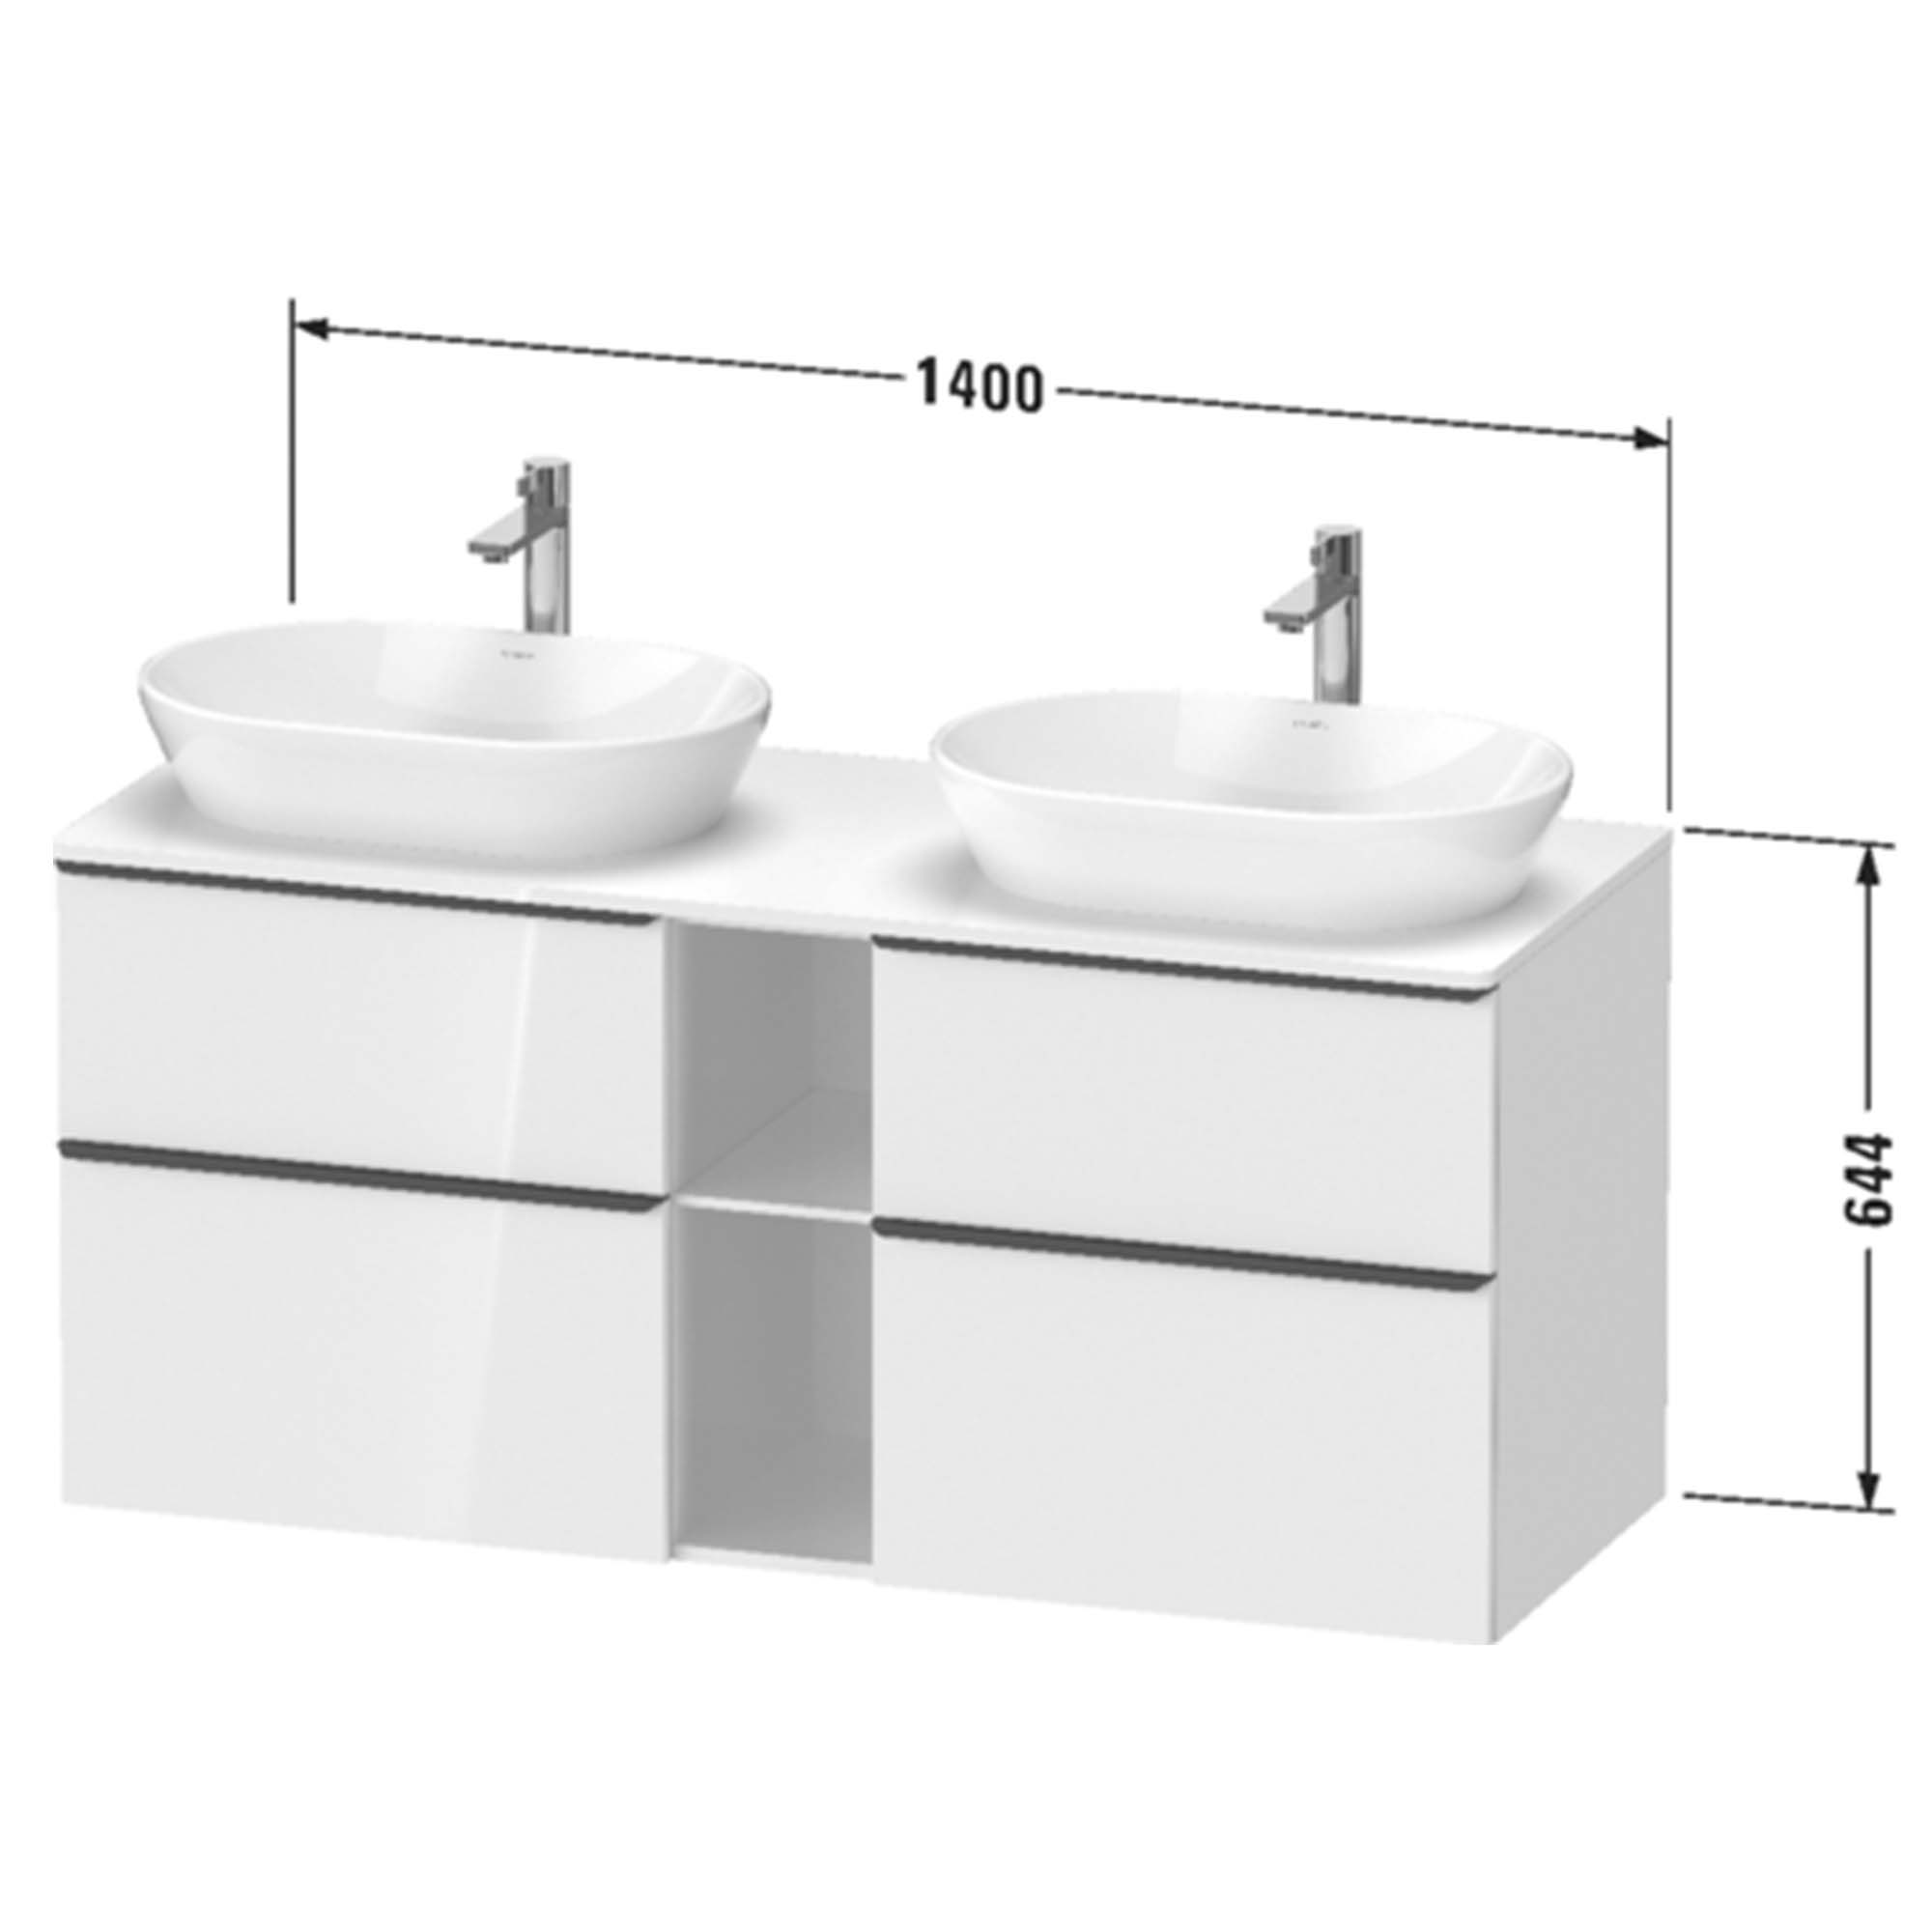 duravit d-neo 1400 wall mounted vanity unit with worktop 2 open shelves dimensions